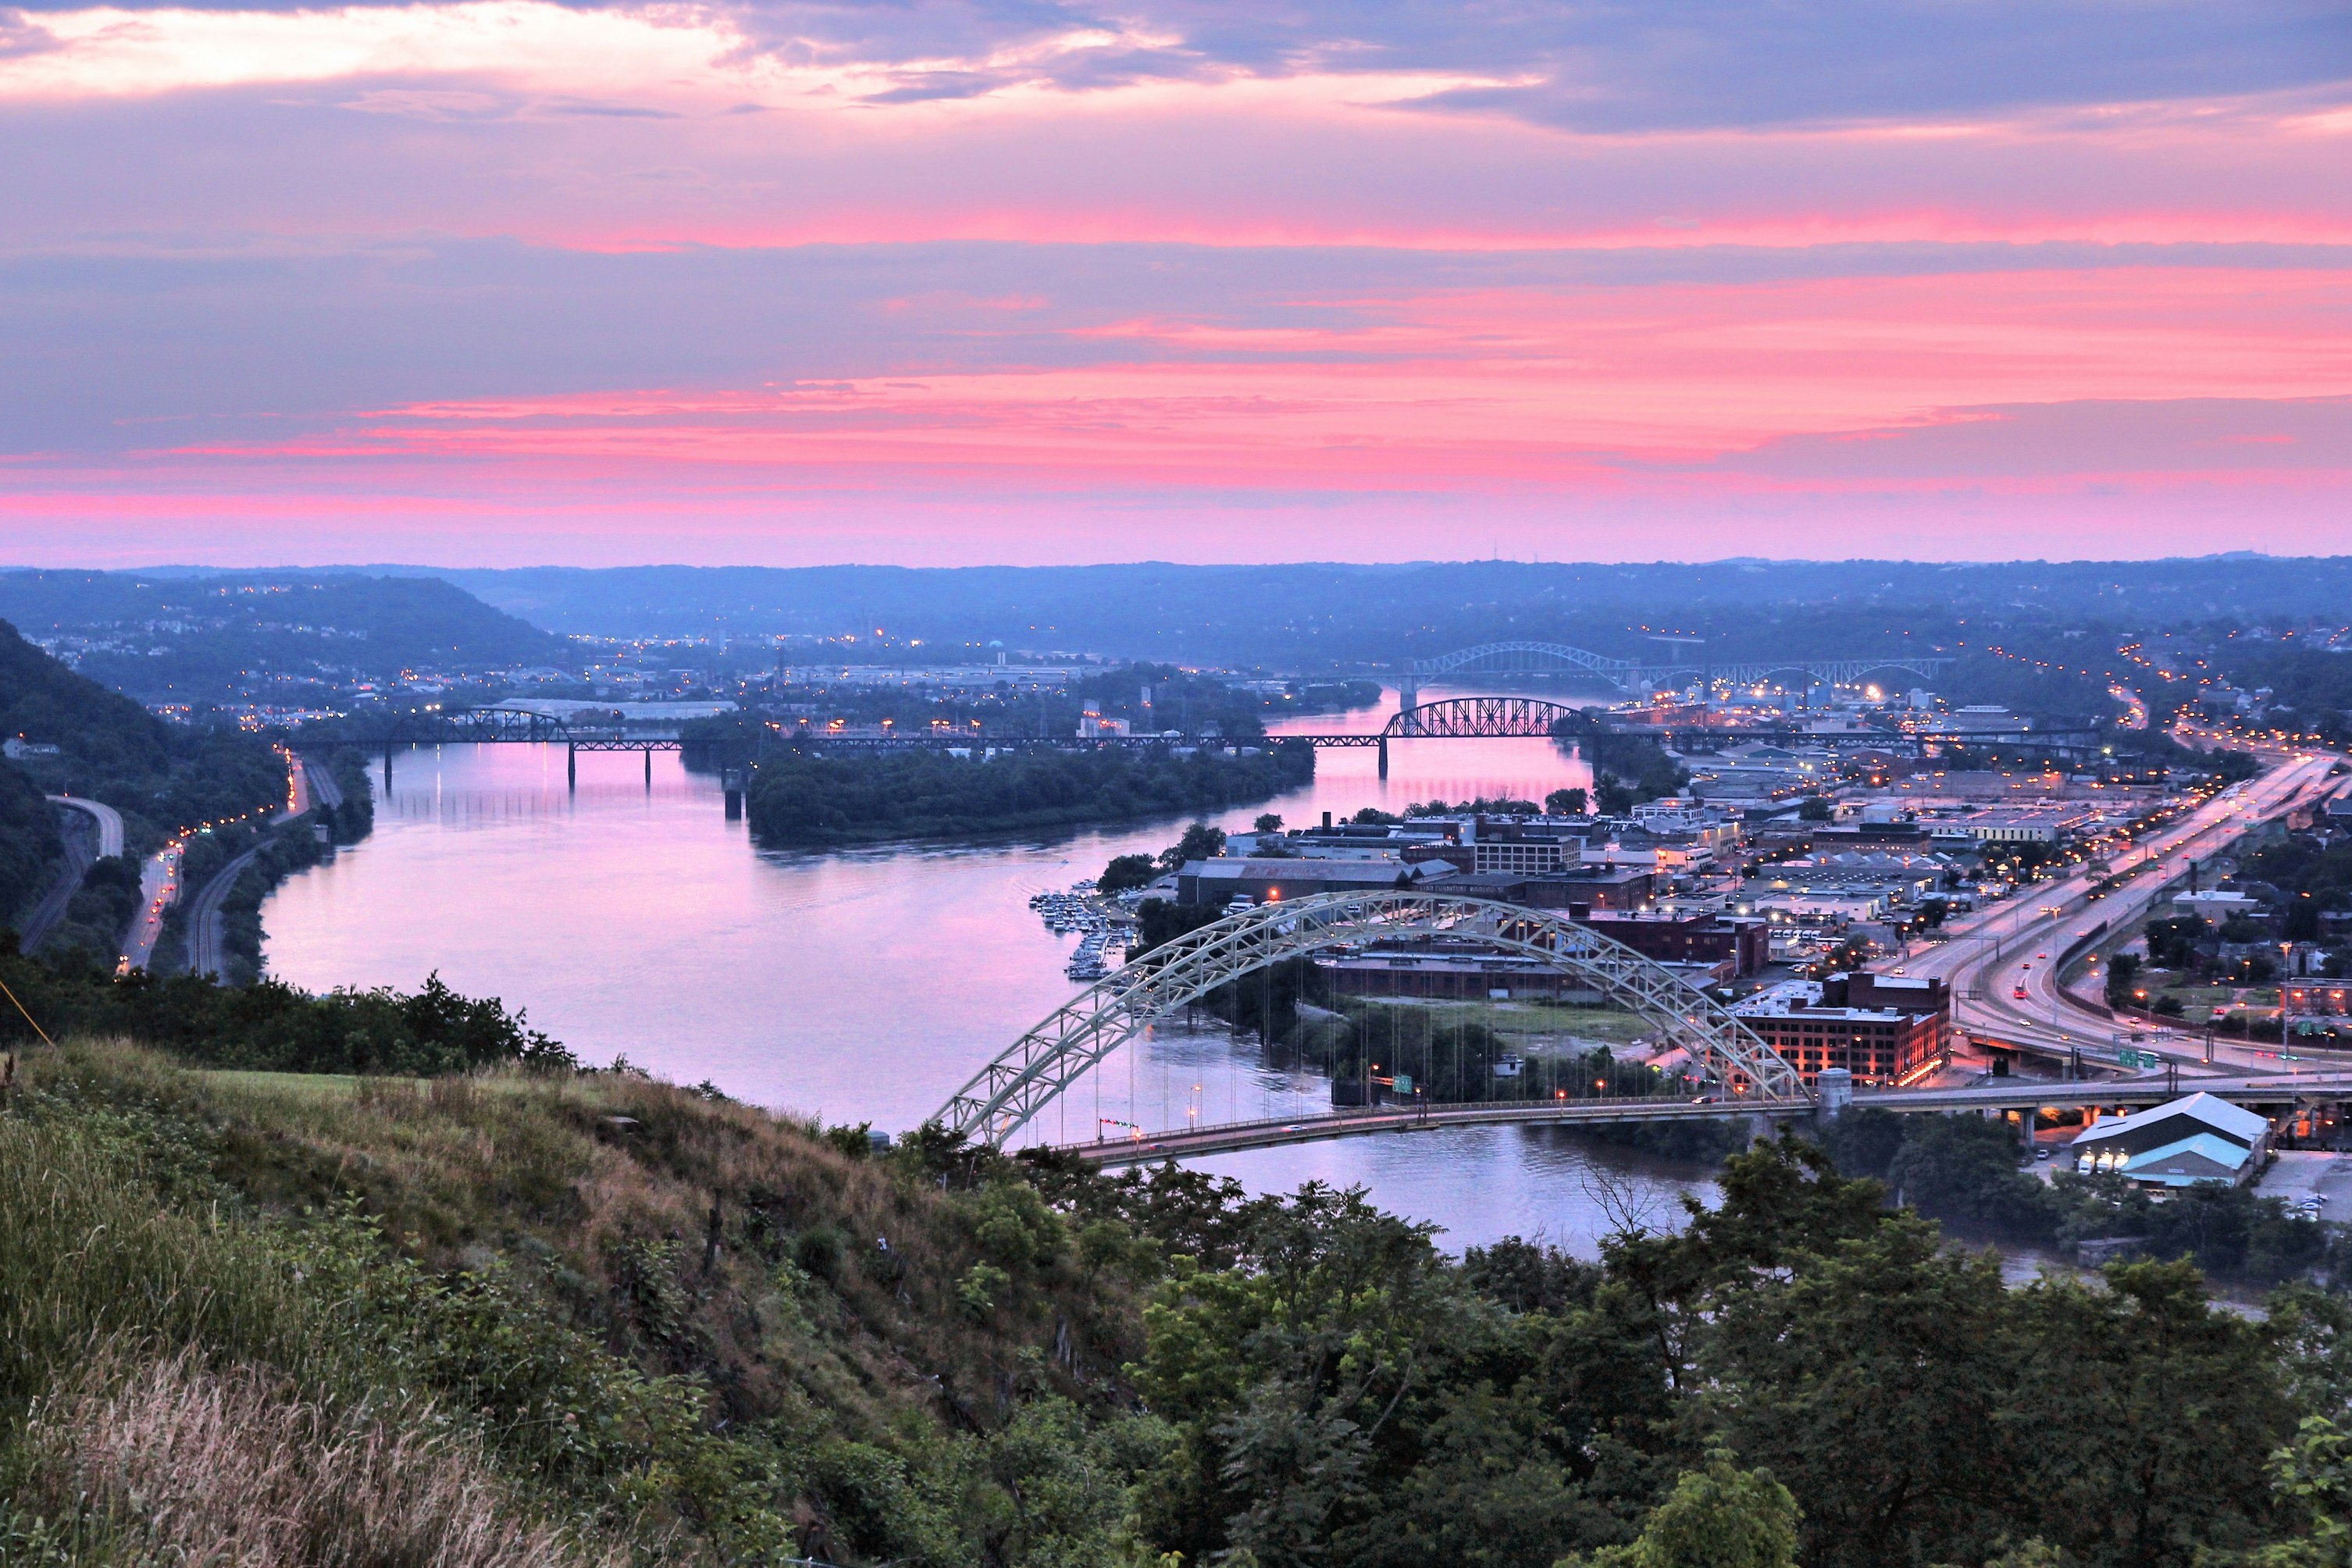 A view of Pittsburgh looking north over the West End Bridge towards Brunot Island and the Chateau District at sunset, which is drying the sky and the Ohio River  brilliant shades of pink and orange .jpg